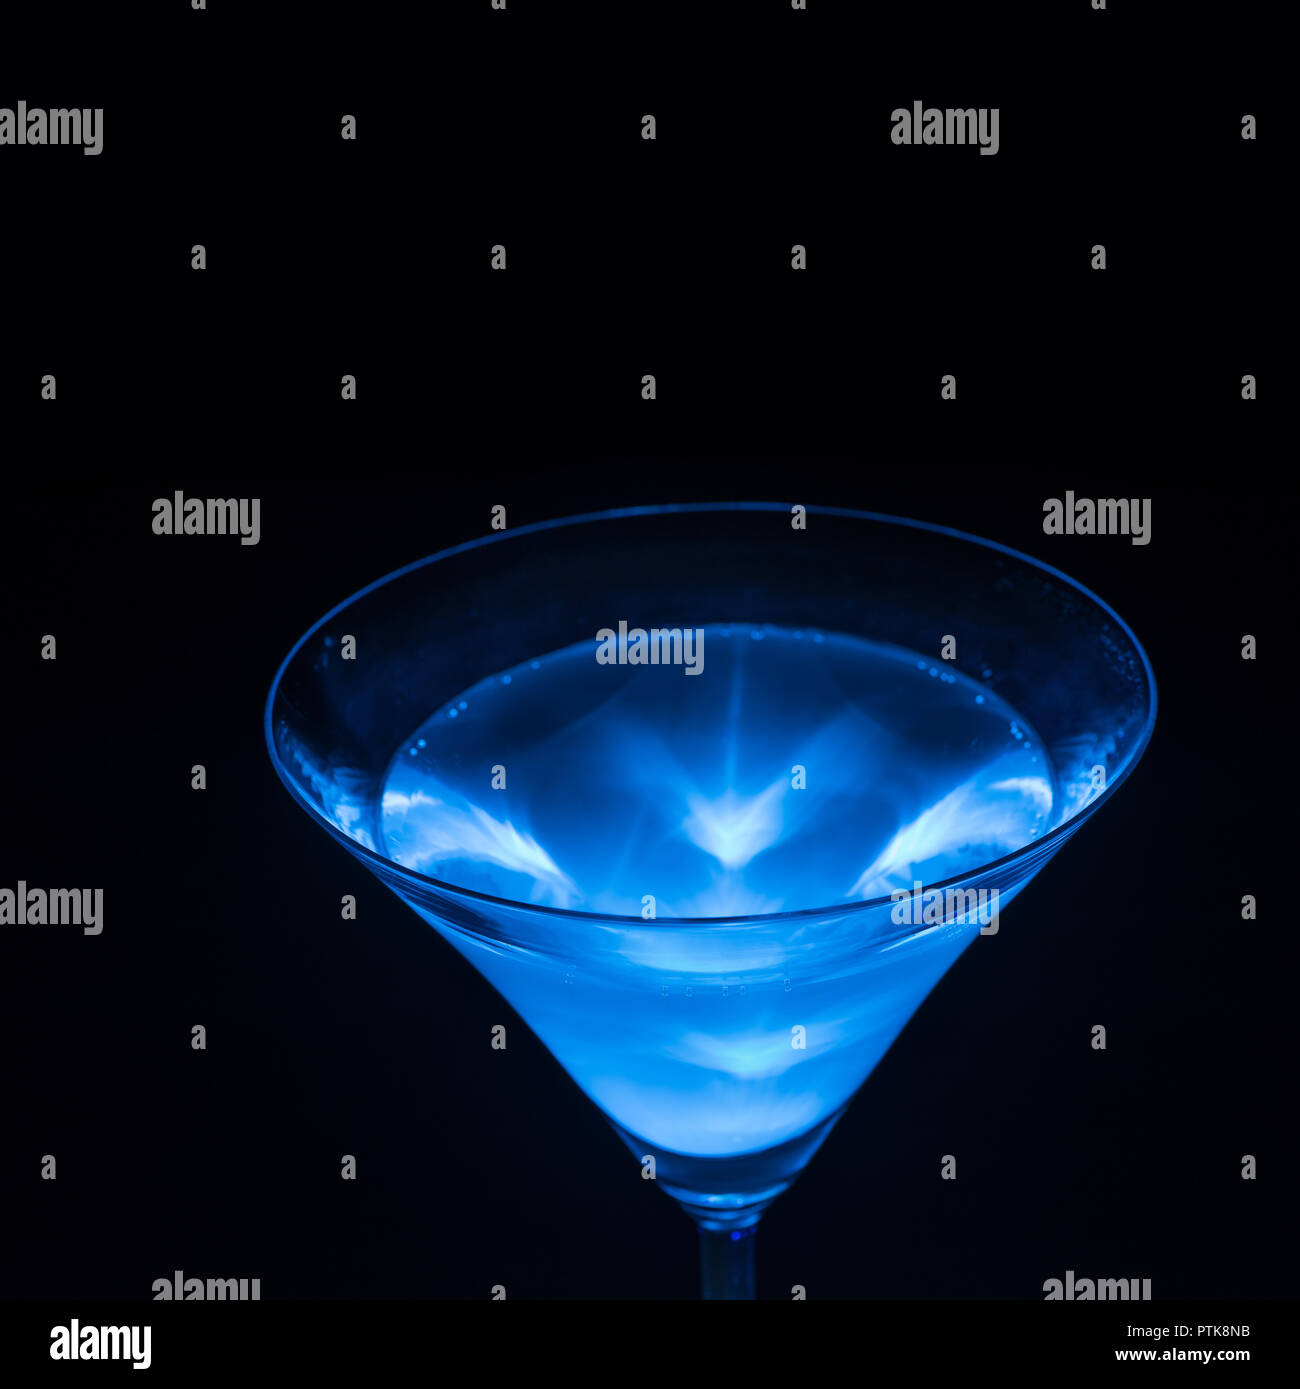 Glowing blue tonic water, quinine, as used in gin and tonic emmits light as visible when activated by ultraviolet A UV light 365 nm Stock Photo